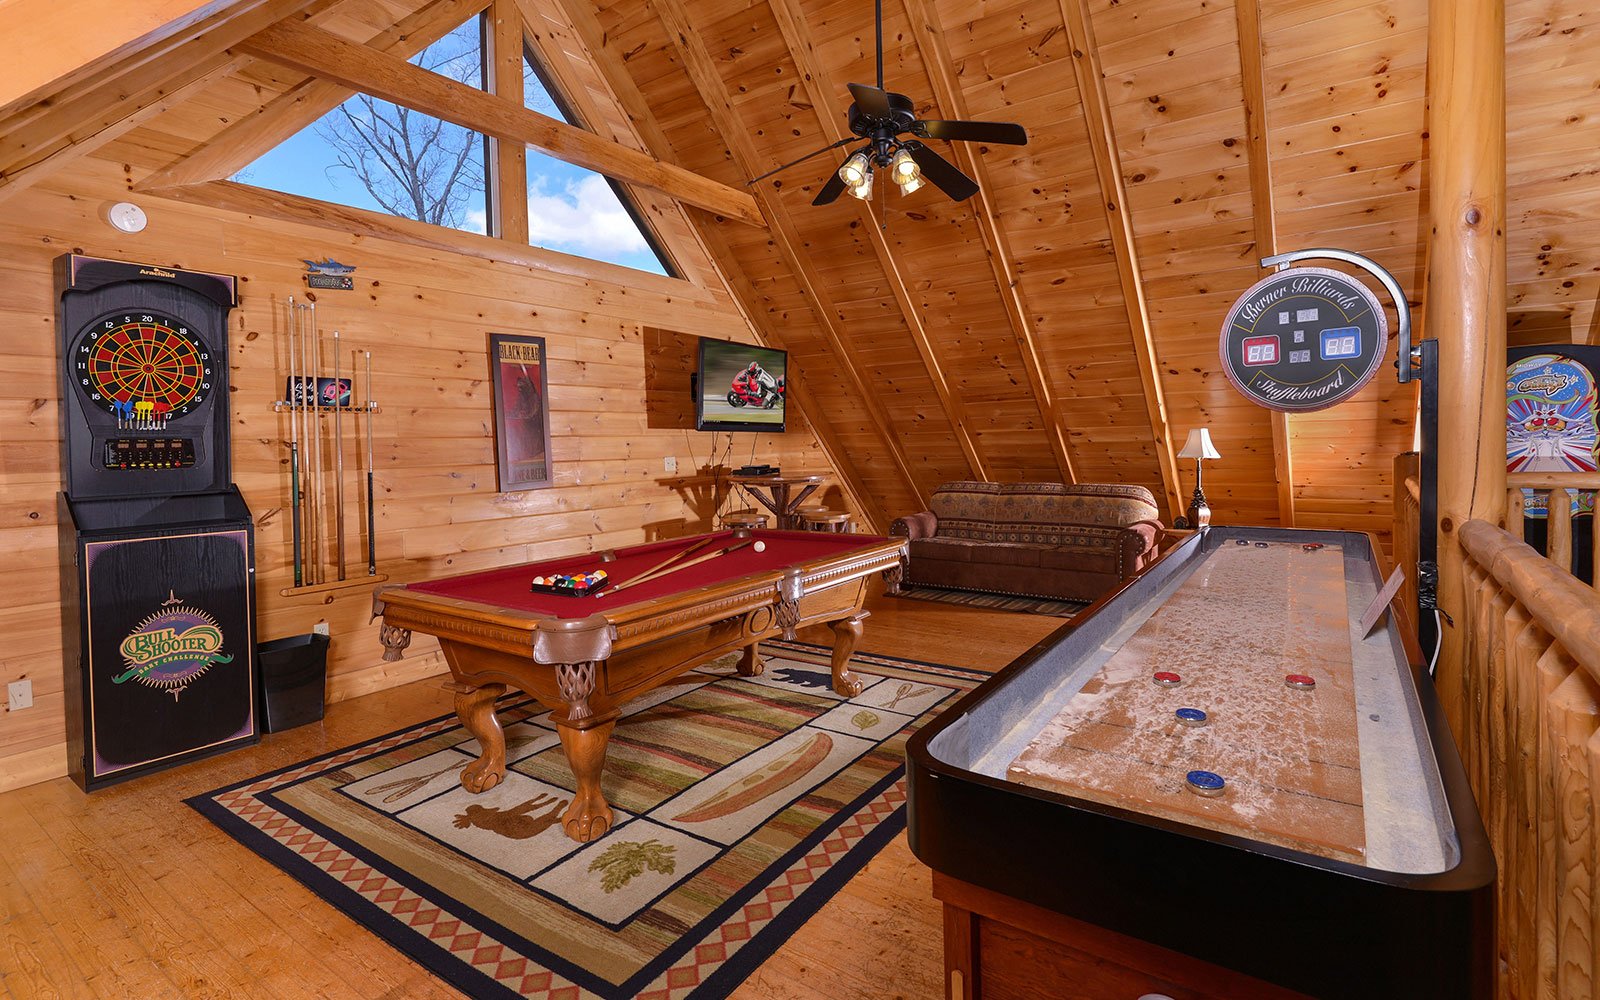 Lucky Enough - Pet Friendly Cabin with Games to Keep Everyone Entertained!